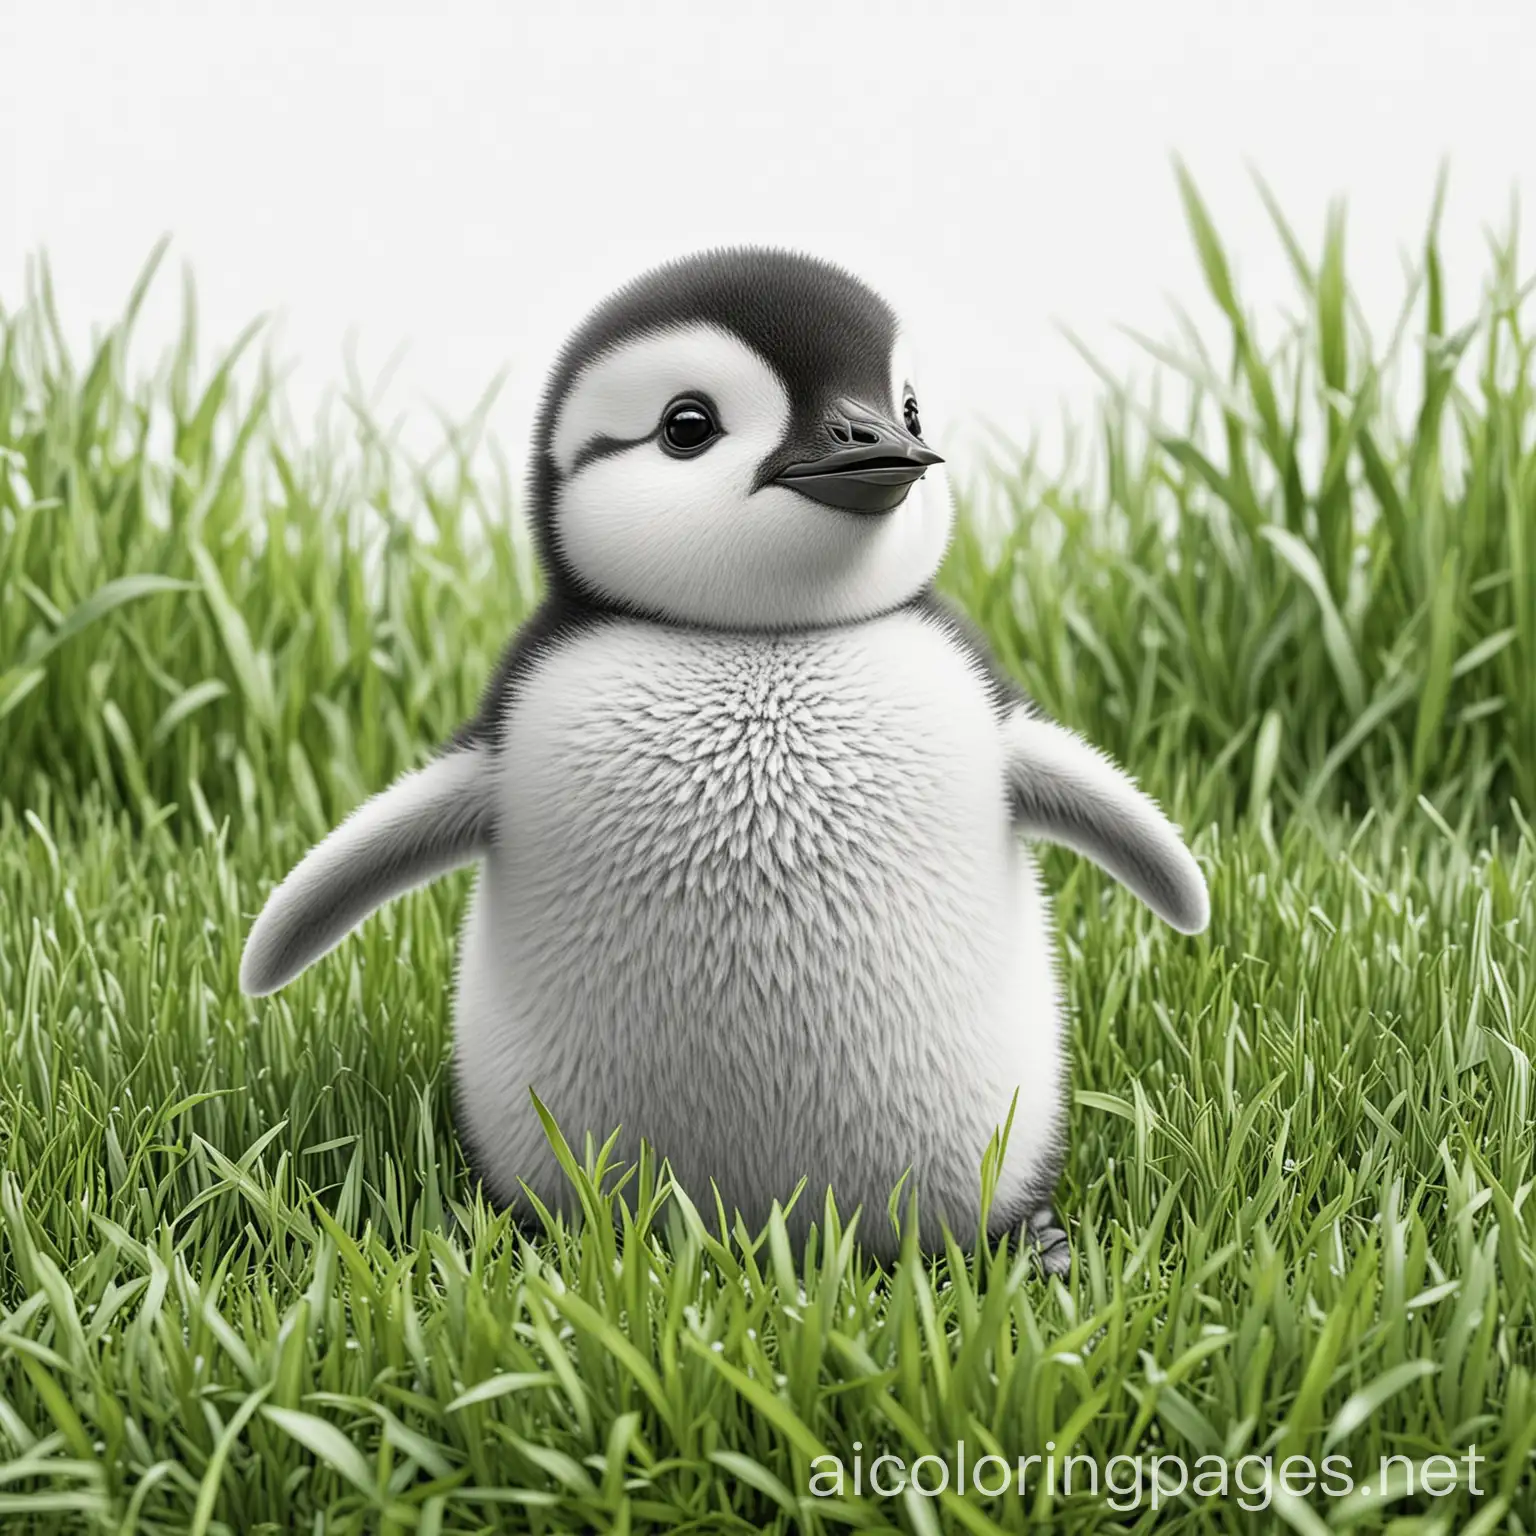 a cute baby penguin playing in green grass having fun, Coloring Page, black and white, line art, white background, Simplicity, Ample White Space. The background of the coloring page is plain white to make it easy for young children to color within the lines. The outlines of all the subjects are easy to distinguish, making it simple for kids to color without too much difficulty